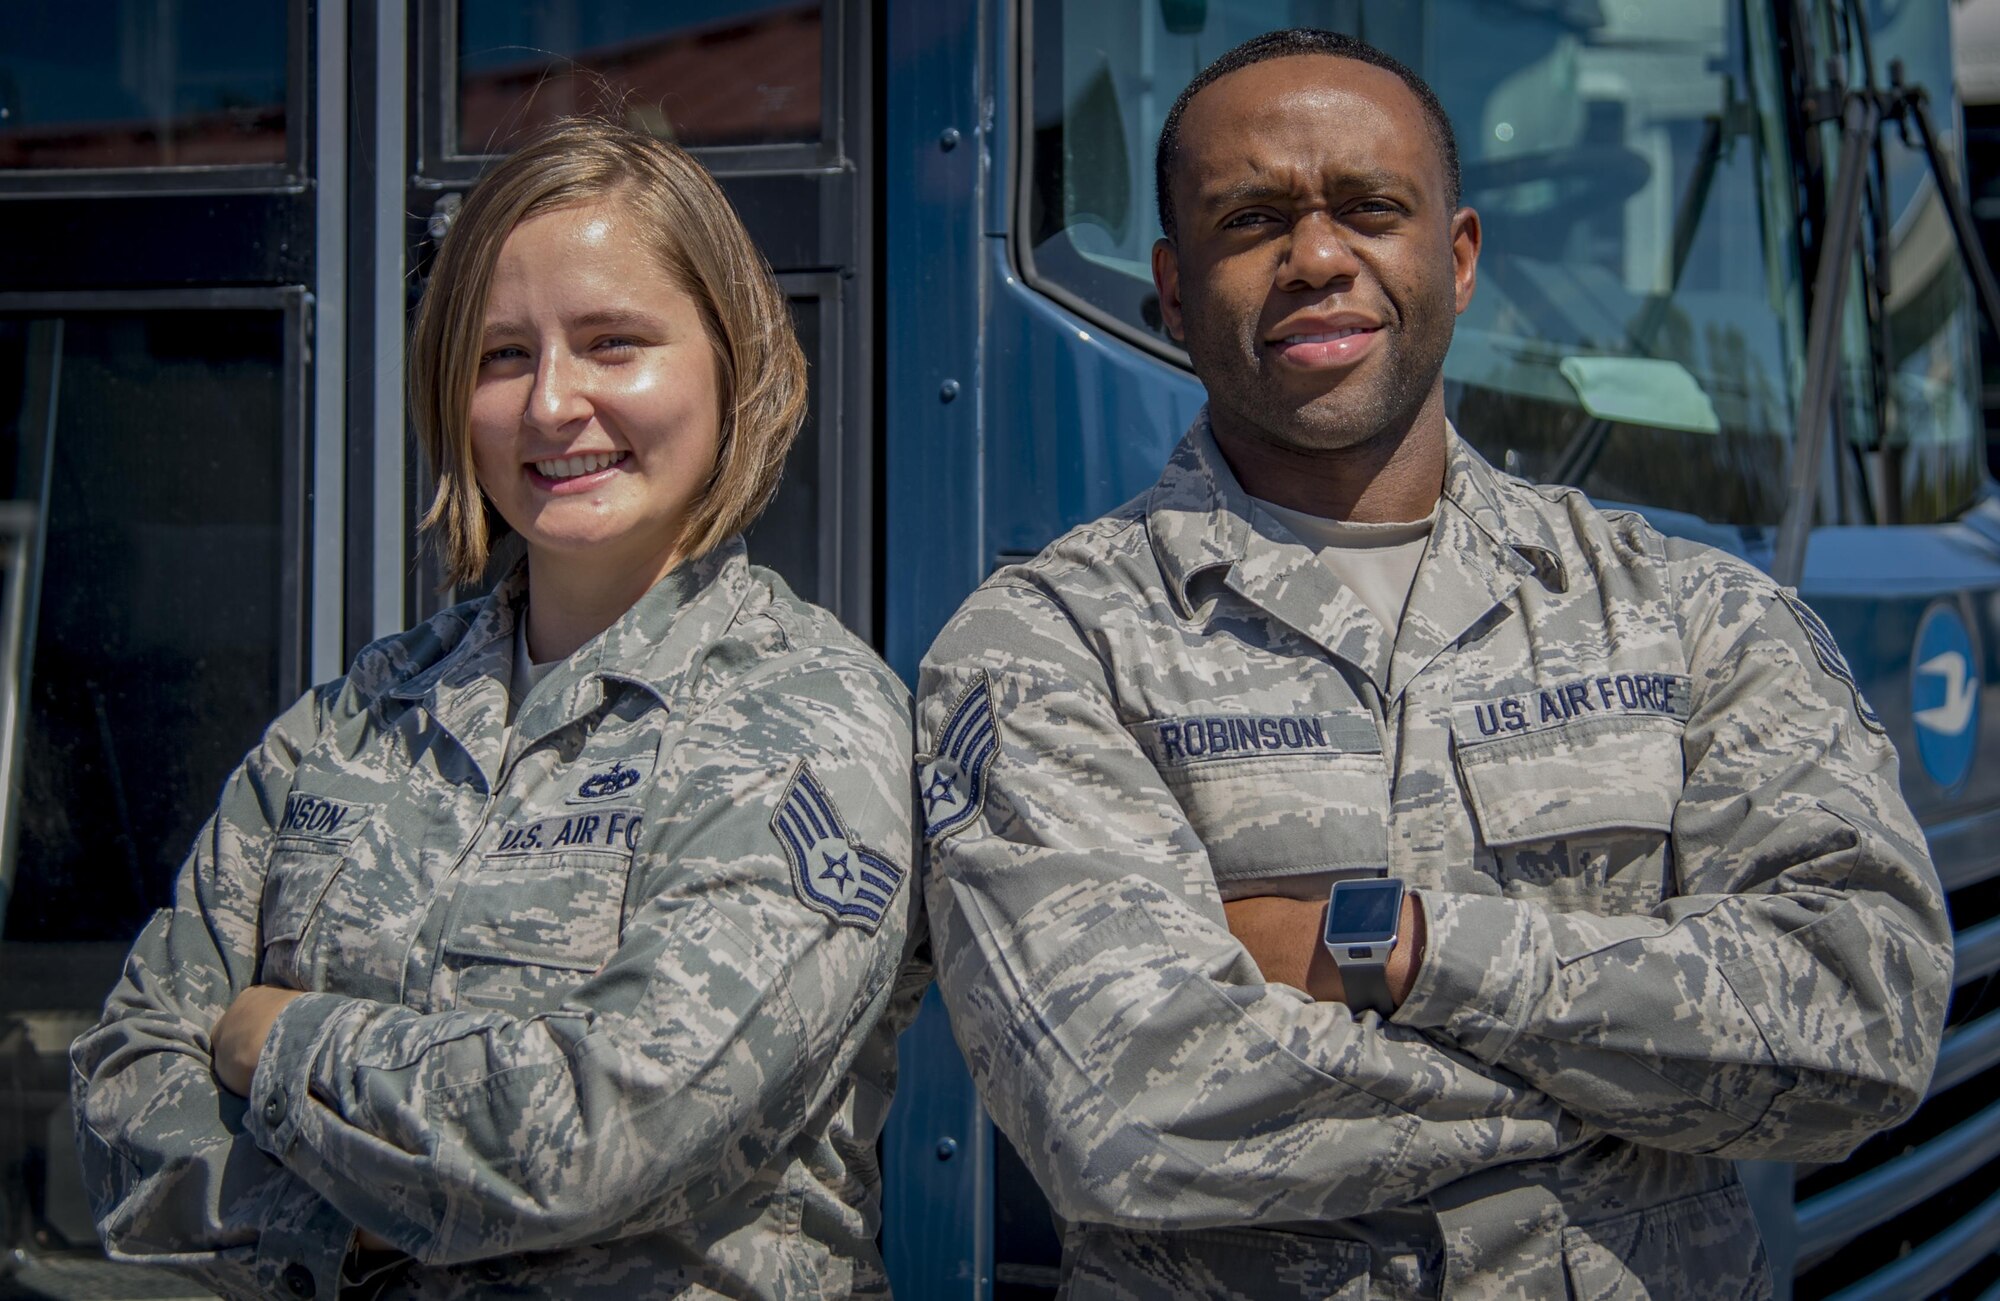 U.S. Air Force Staff Sgt. Christine Robinson, a unit deployment manager, and Staff Sgt. Kevin Robinson, a vehicle dispatcher, both assigned to the 6th Logistics Readiness Squadron, pause for a photo at MacDill Air Force Base, Fla., Oct. 12, 2017. The married couple has completed four deployments between the two of them, totaling 28 months, and are now scheduled to serve their first deployment together. (U.S. Air Force photo by Senior Airman Mariette Adams)